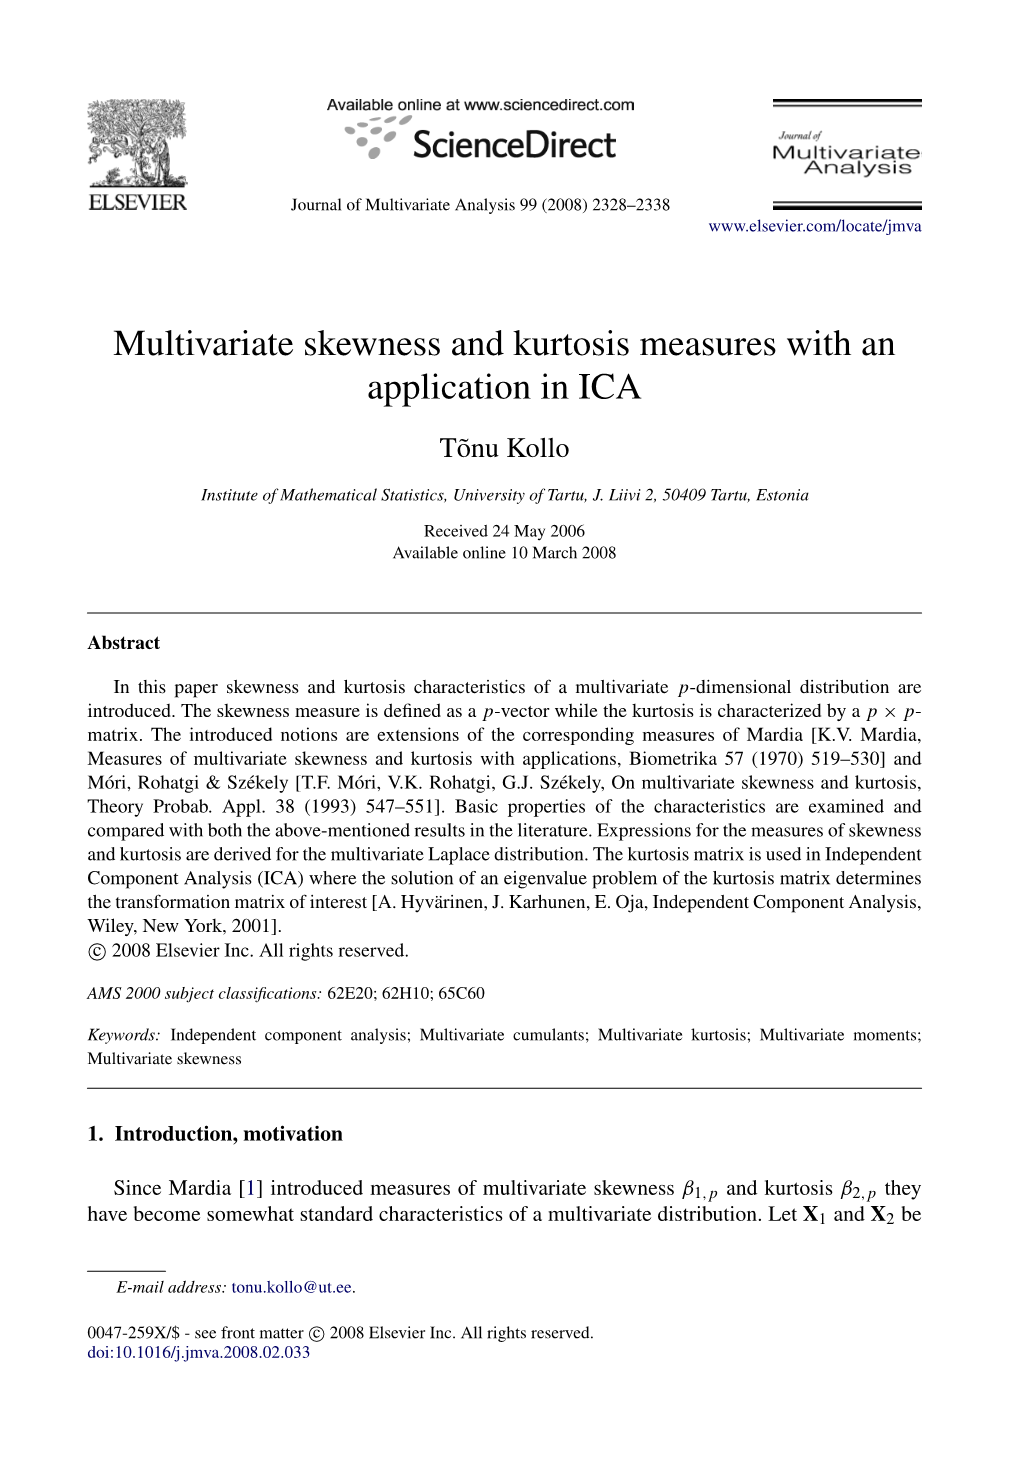 Multivariate Skewness and Kurtosis Measures with an Application in ICA